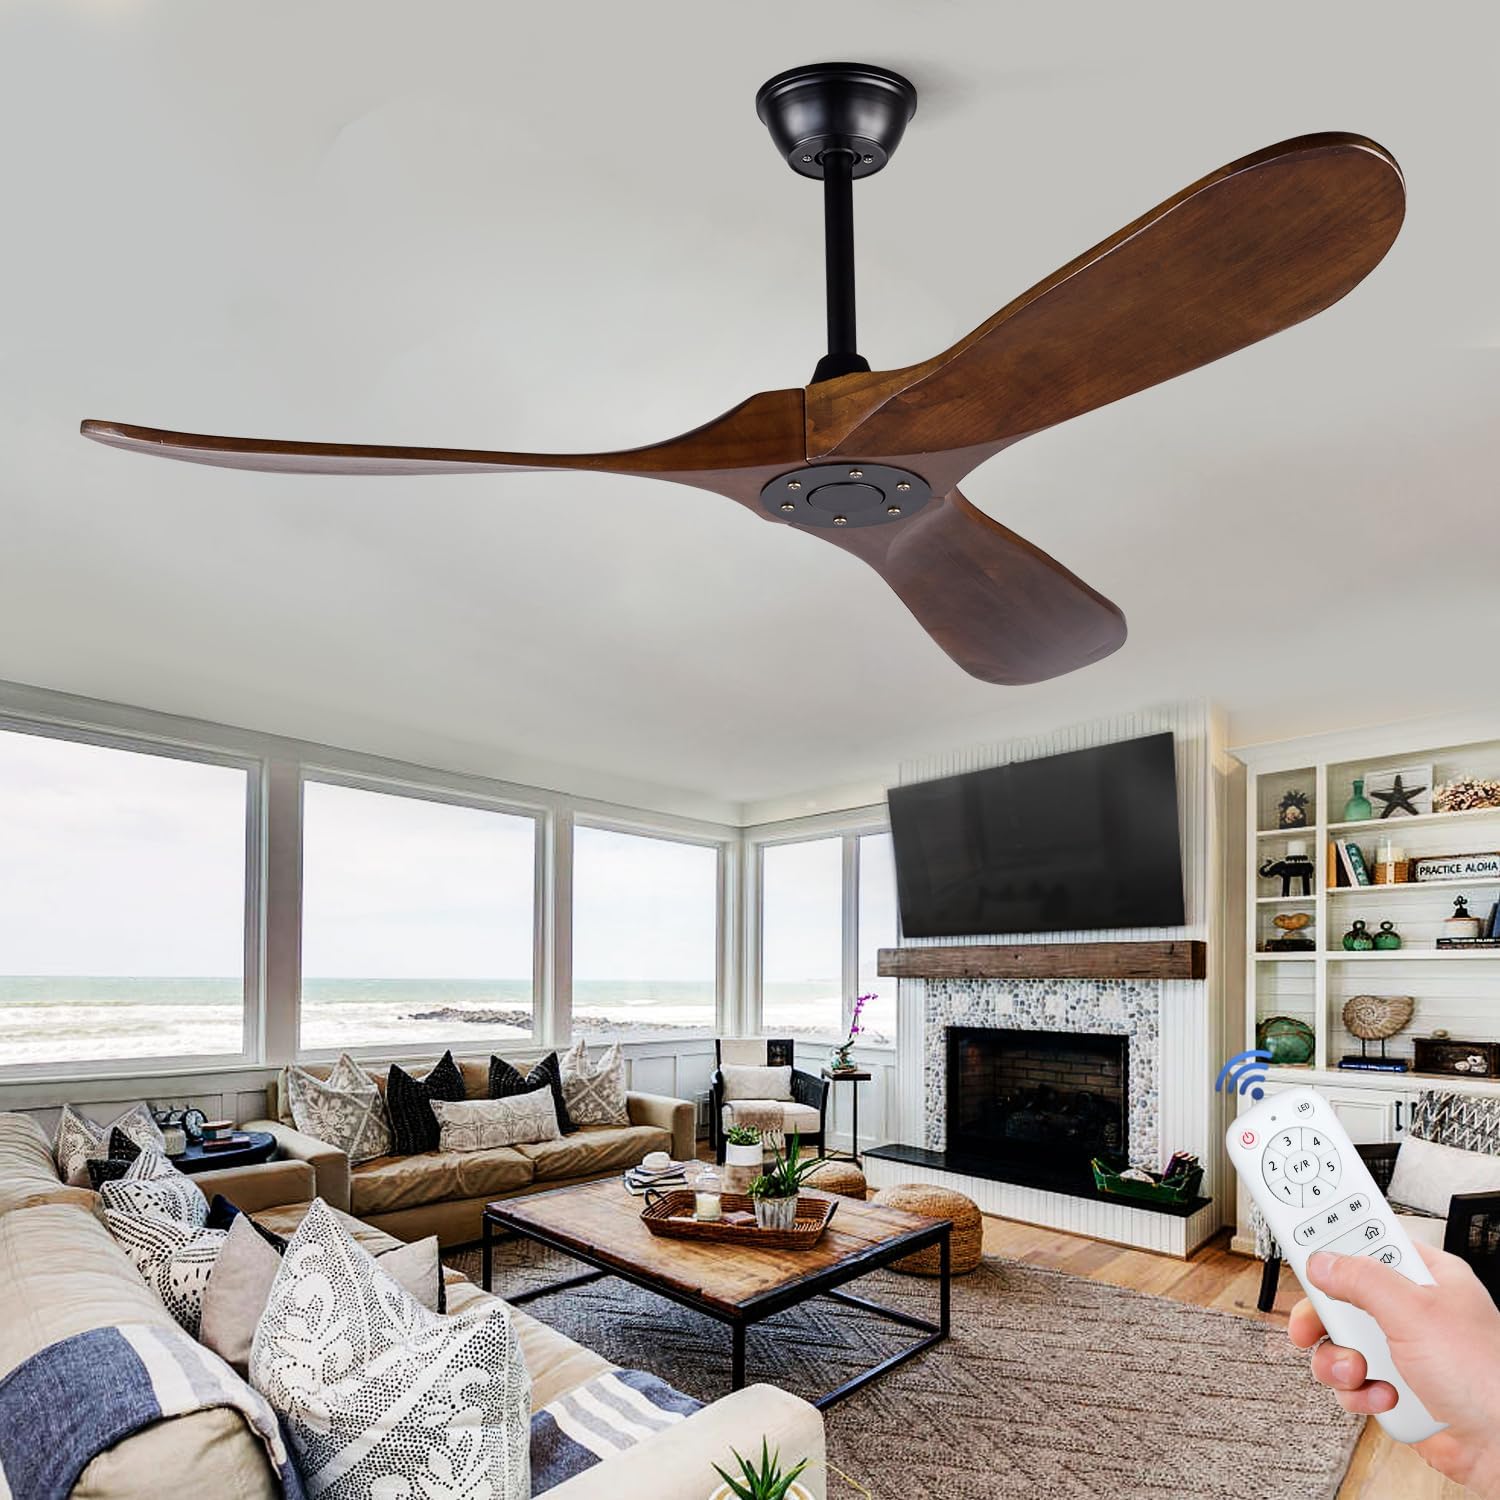 BOJUE 52 inch Solid Wood Ceiling Fan Without Light, Indoor Outdoor Ceiling Fan with Remote and 3 Blade for Farmhouse Patio Living Room, Bedroom, Summer House (Black Ceiling Fan+ Walnut Wood Blades)